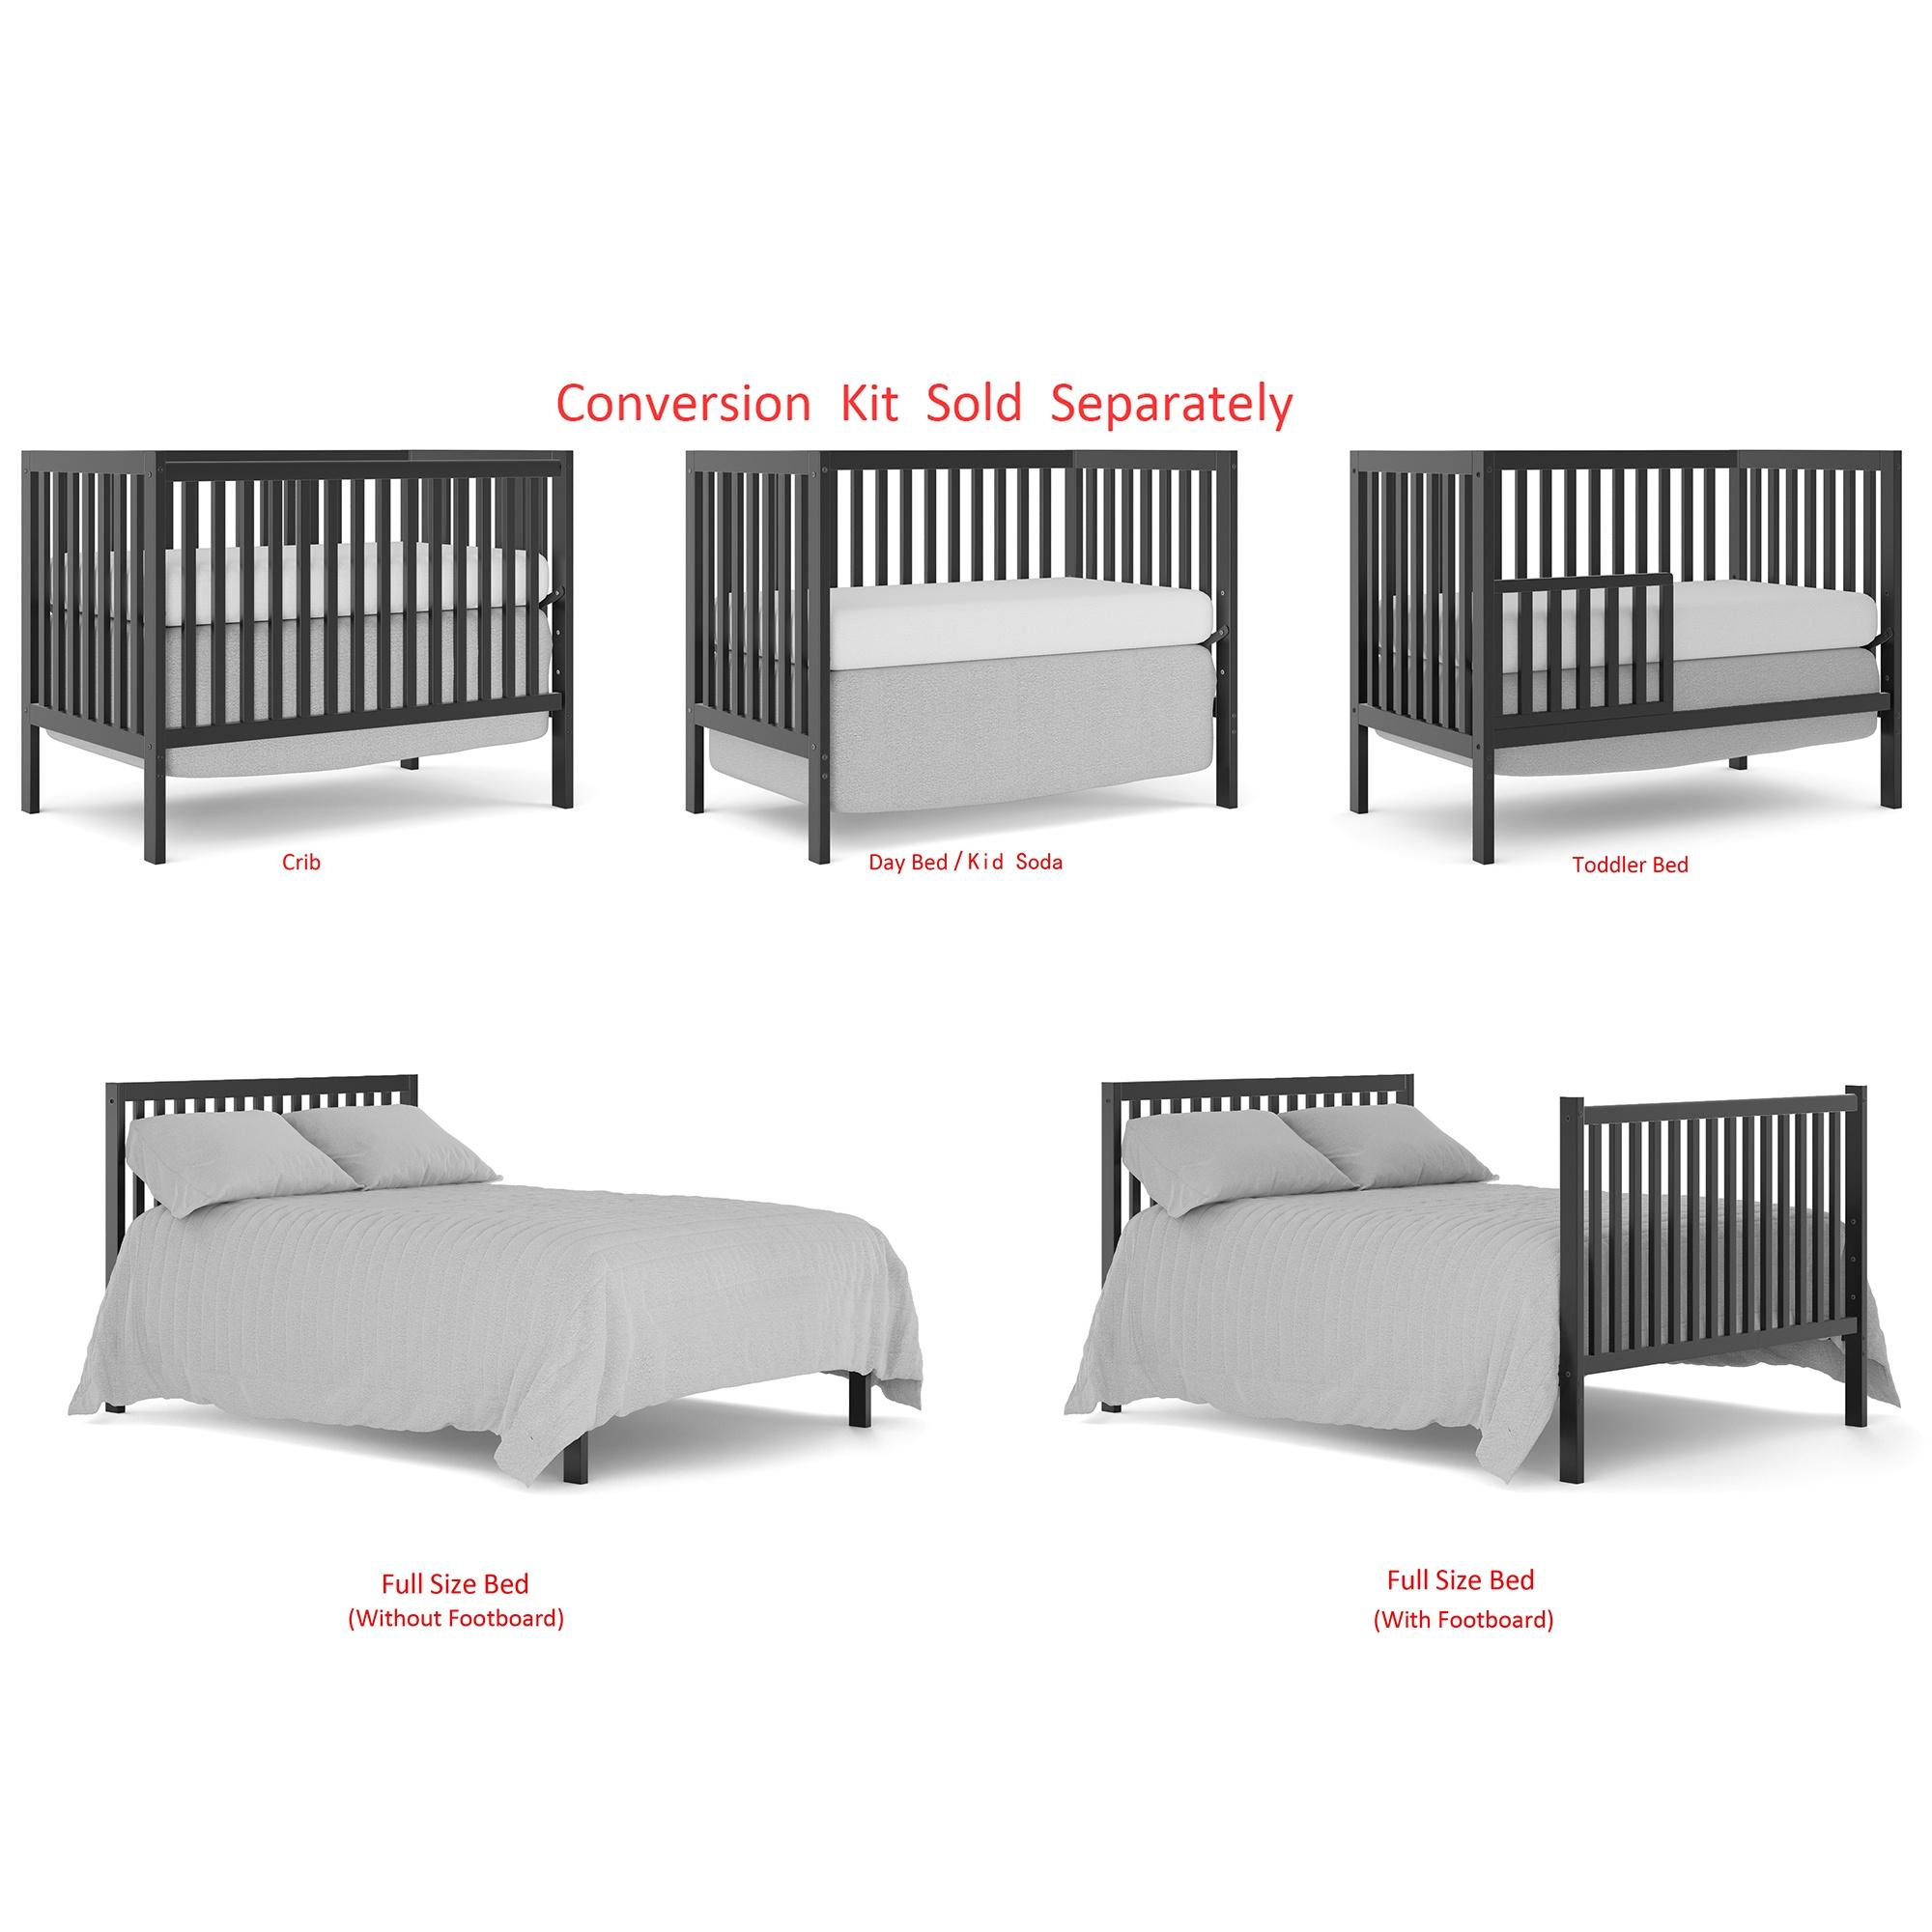 HSUNNS 5-in-1 Convertible Crib, Baby Crib with Slats, Certified Baby Safe Crib, Converts from Baby Crib to Toddler Bed, Easy Assembly, 3 Adjustable Heights, Black - image 4 of 8